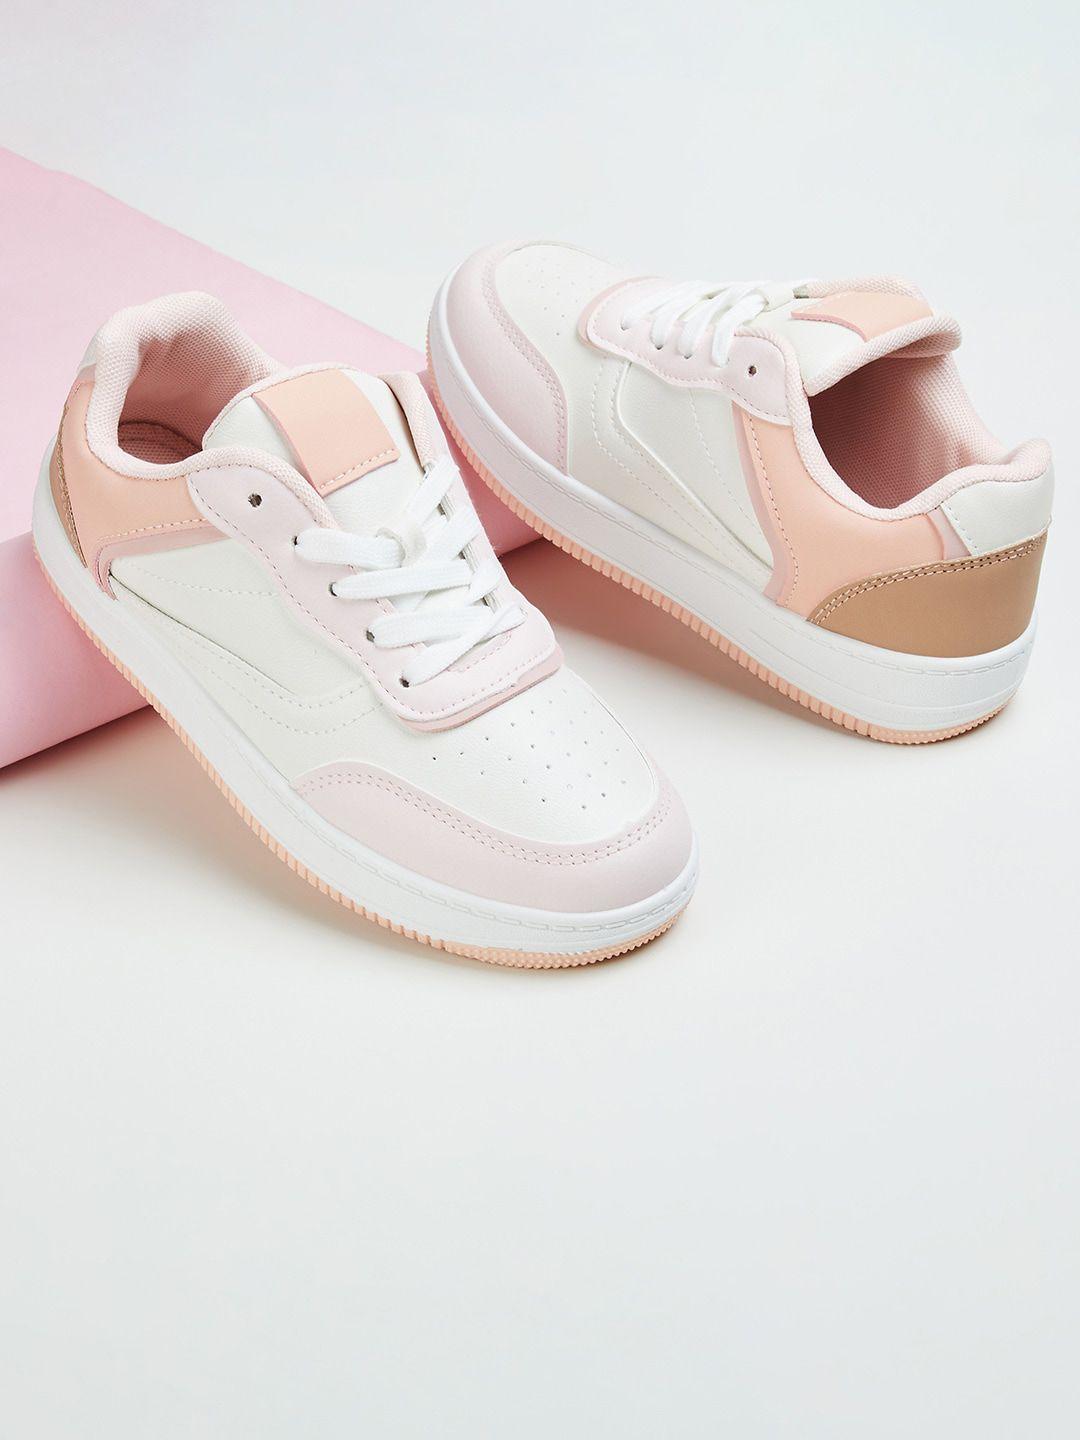 max Girls Colourblocked Sneakers